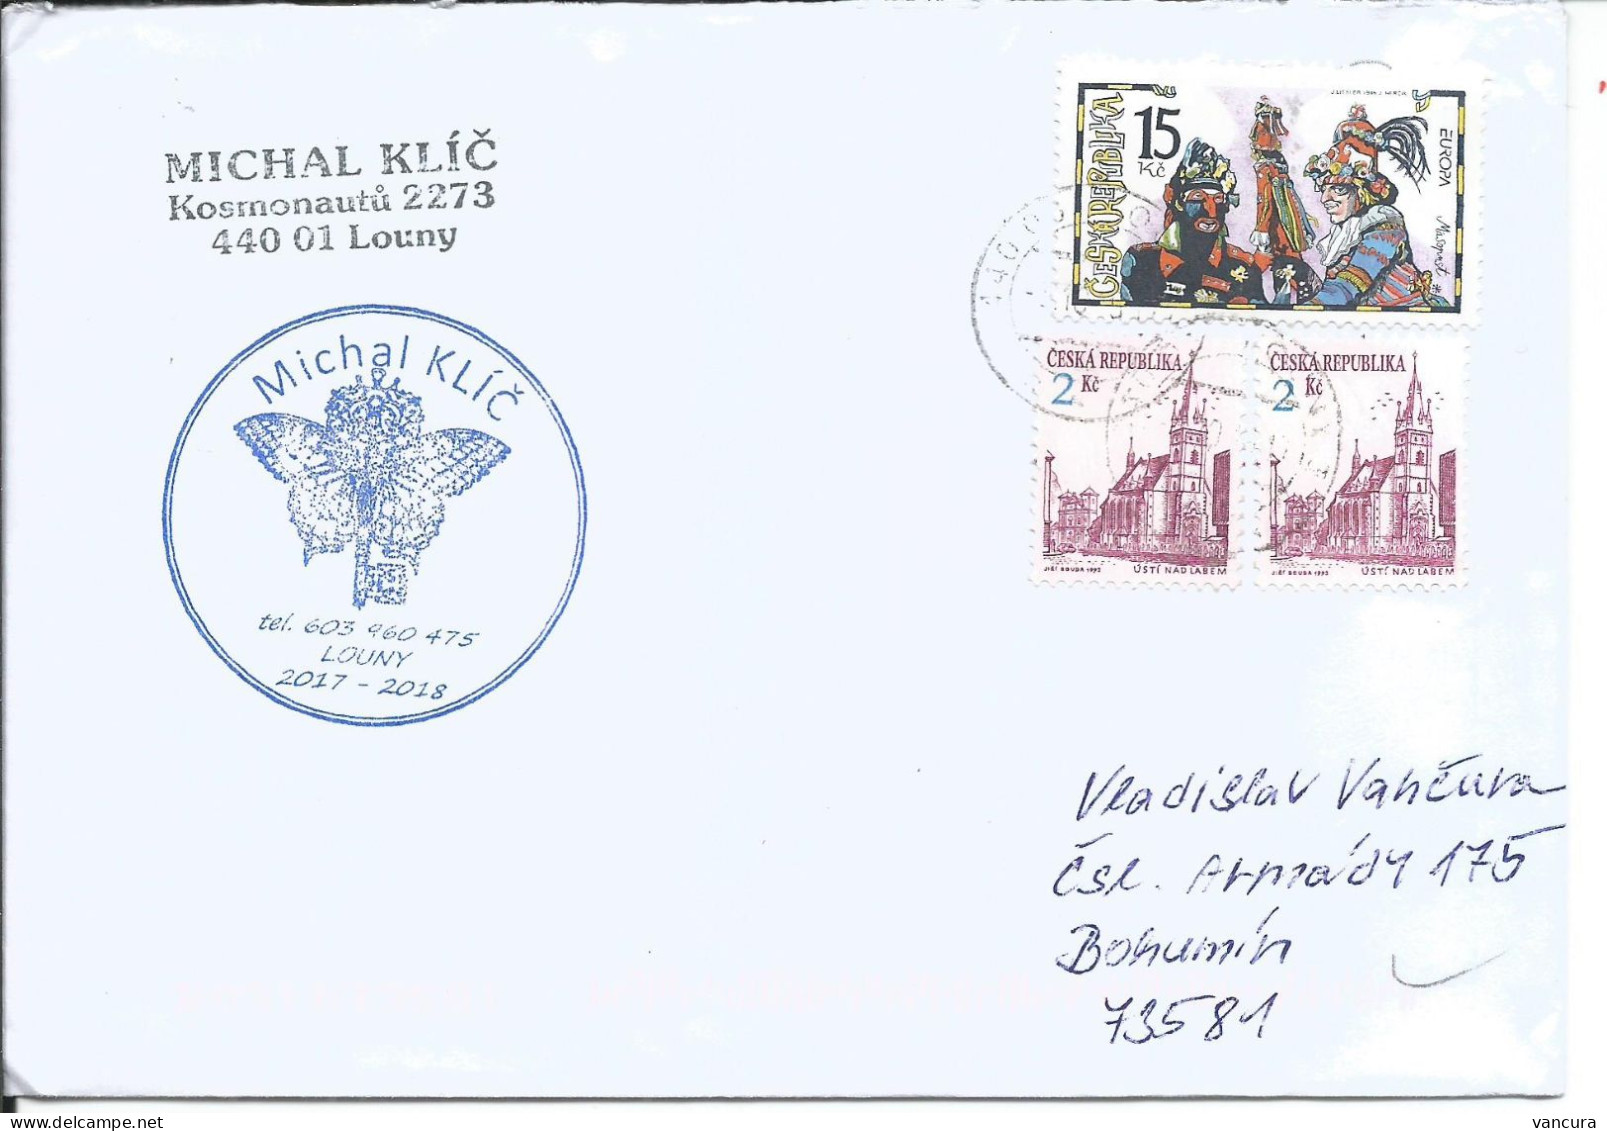 Envelope Czech Republic Circulated In 2019 With No. 184 EUROPA And Butterfly Cachet - Butterflies